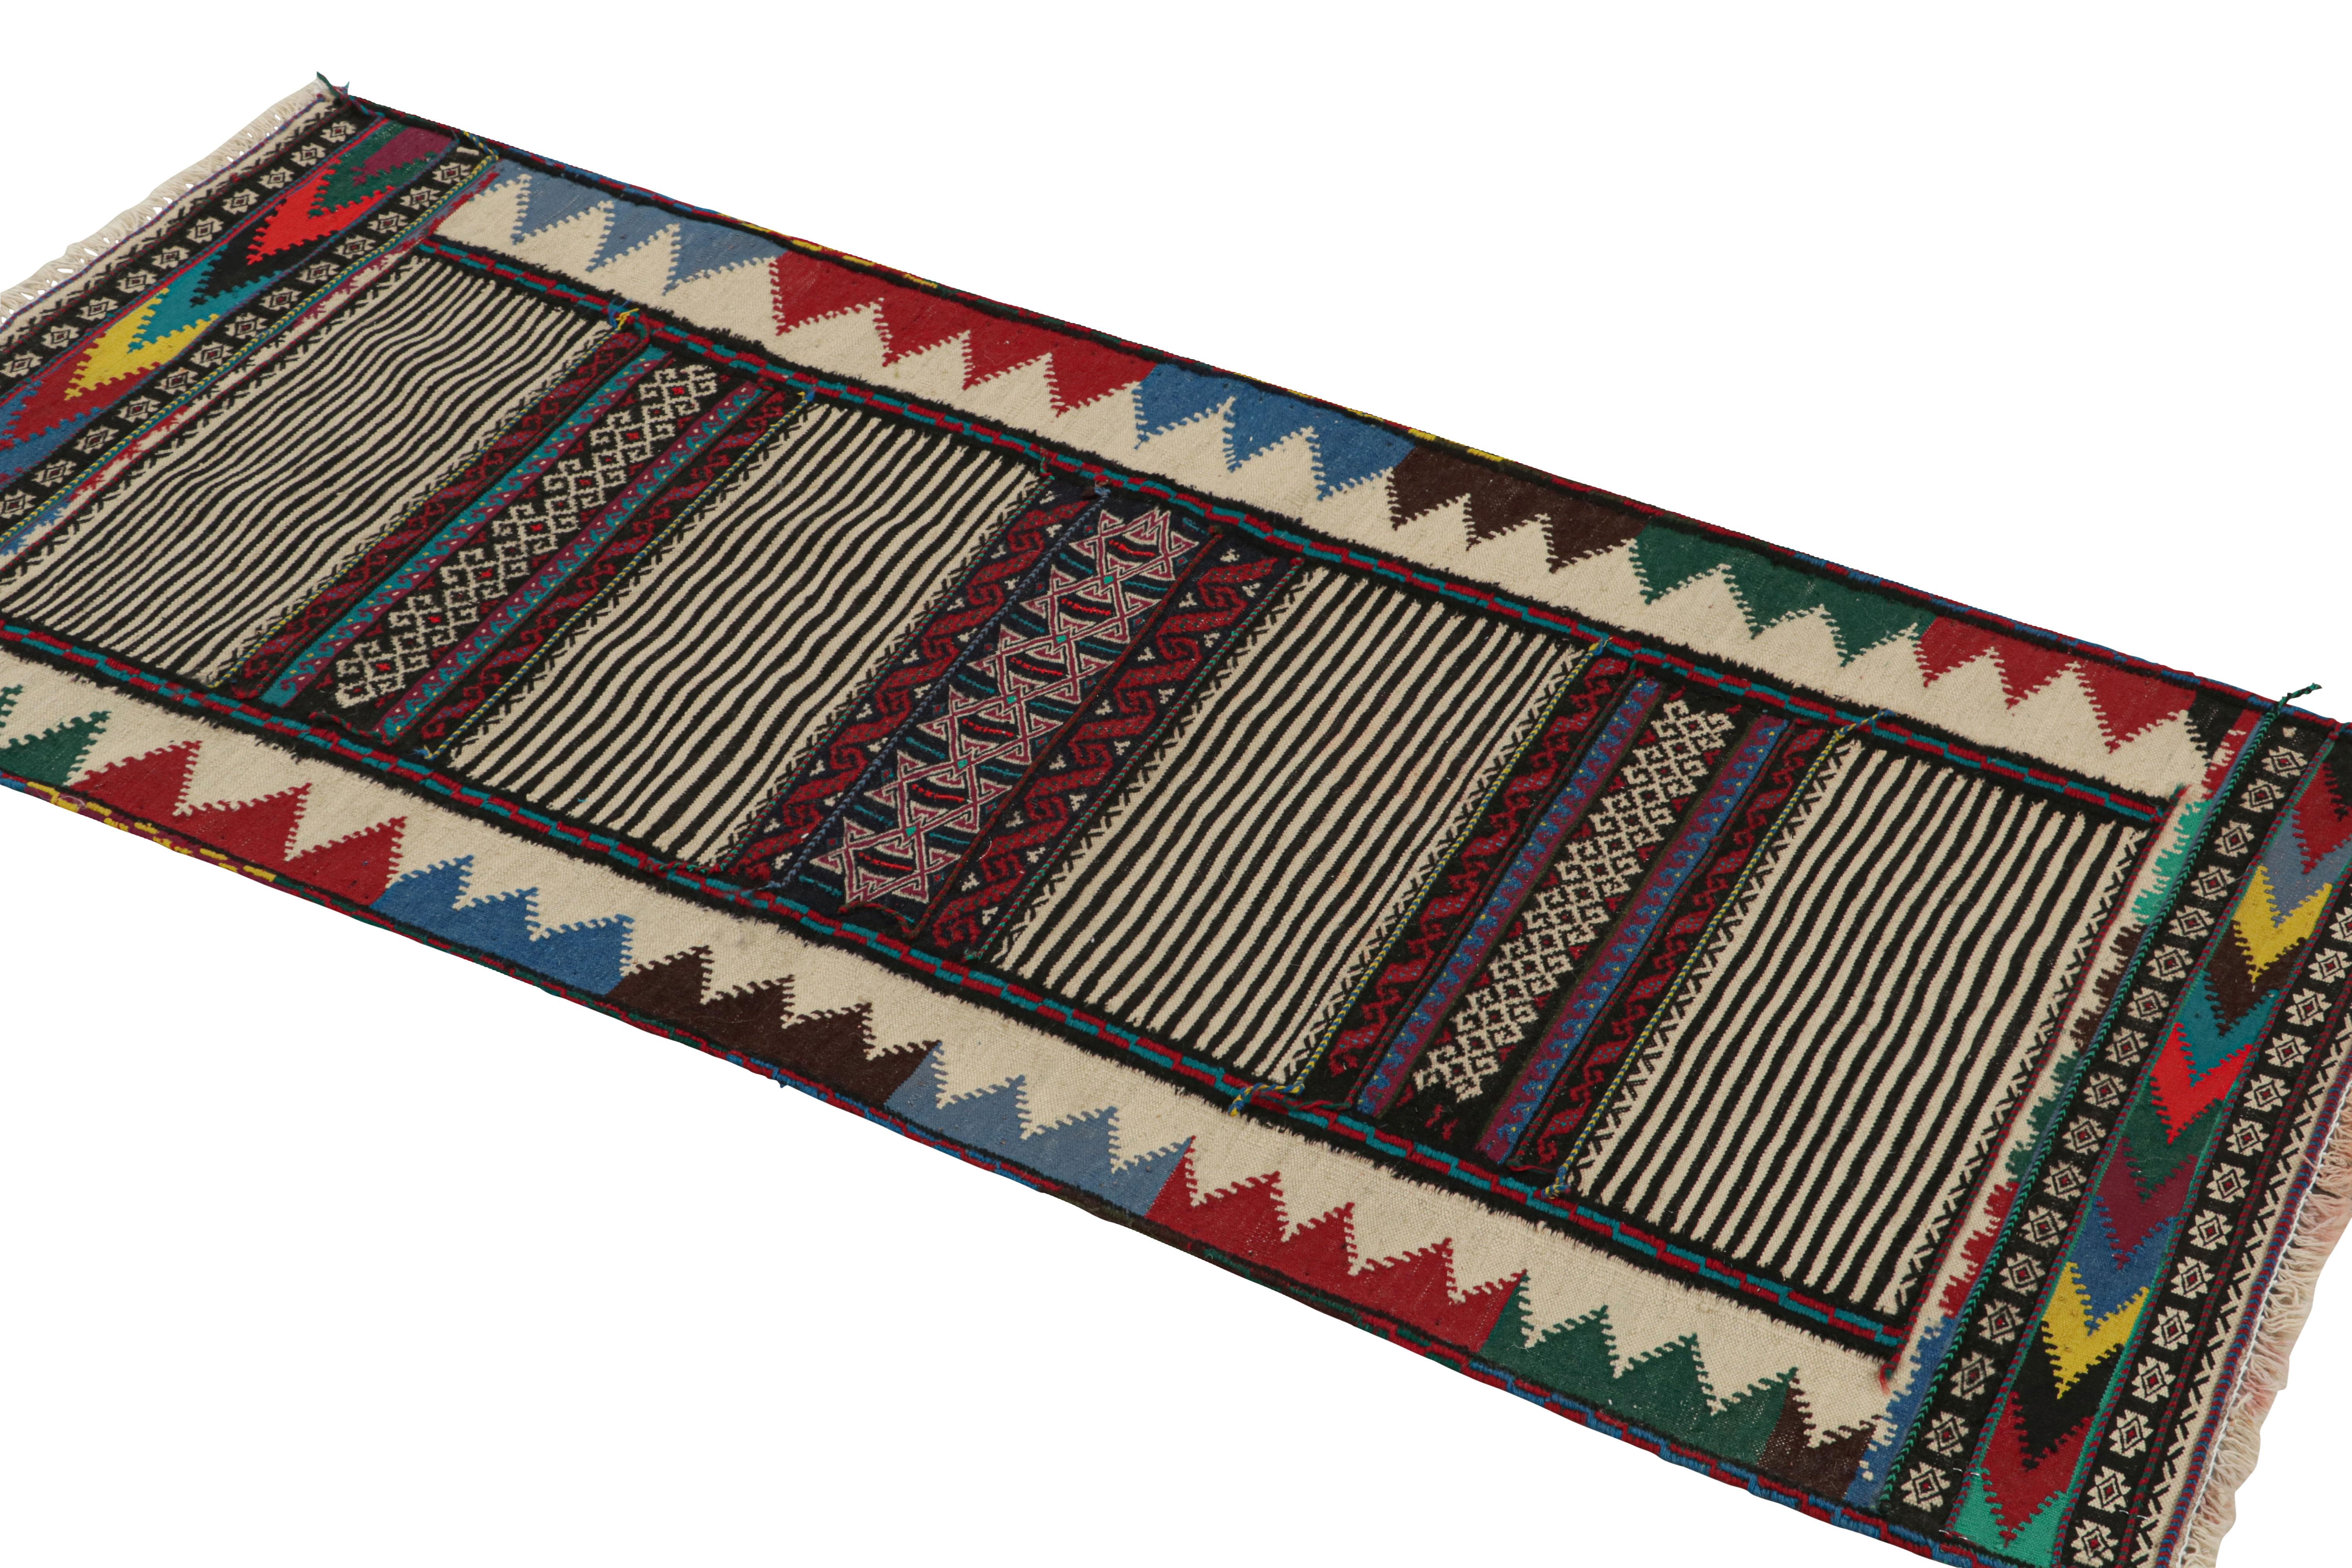 Hand-Woven Vintage Afghan Kilim Rug with Stripes and Geometric Patterns, from Rug & Kilim For Sale